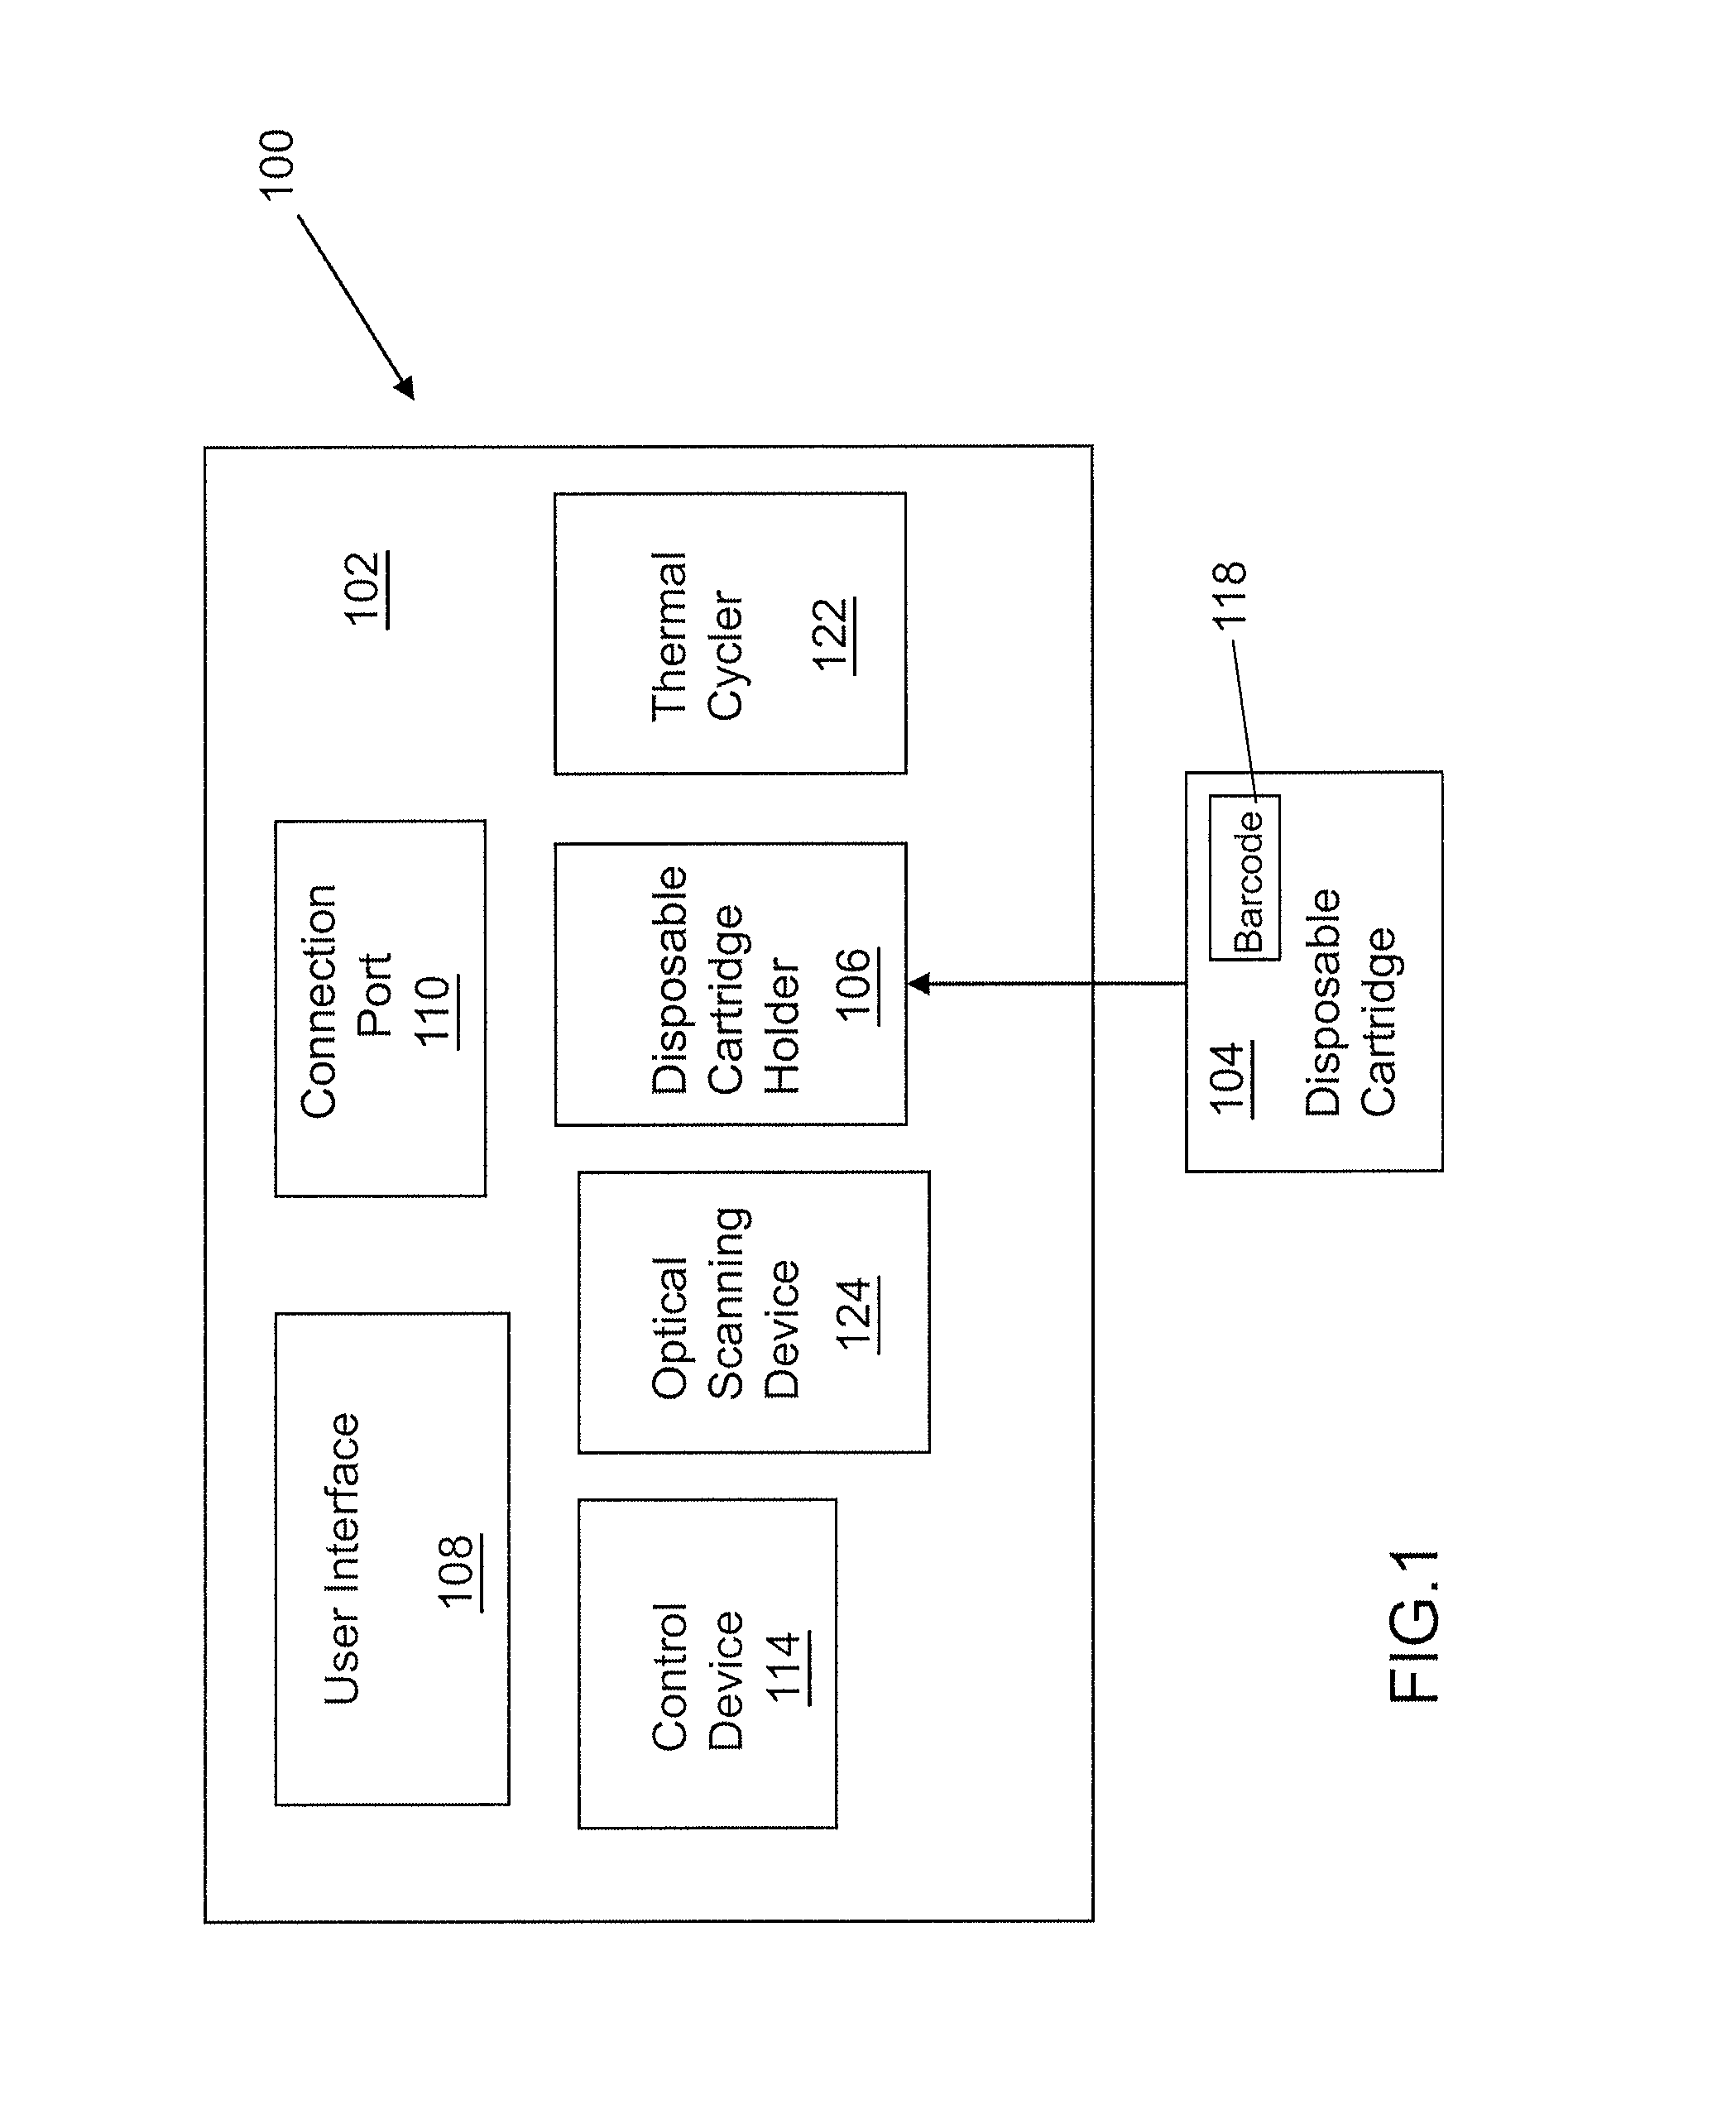 System, devices and methods for monitoring and detection of chemical reactions